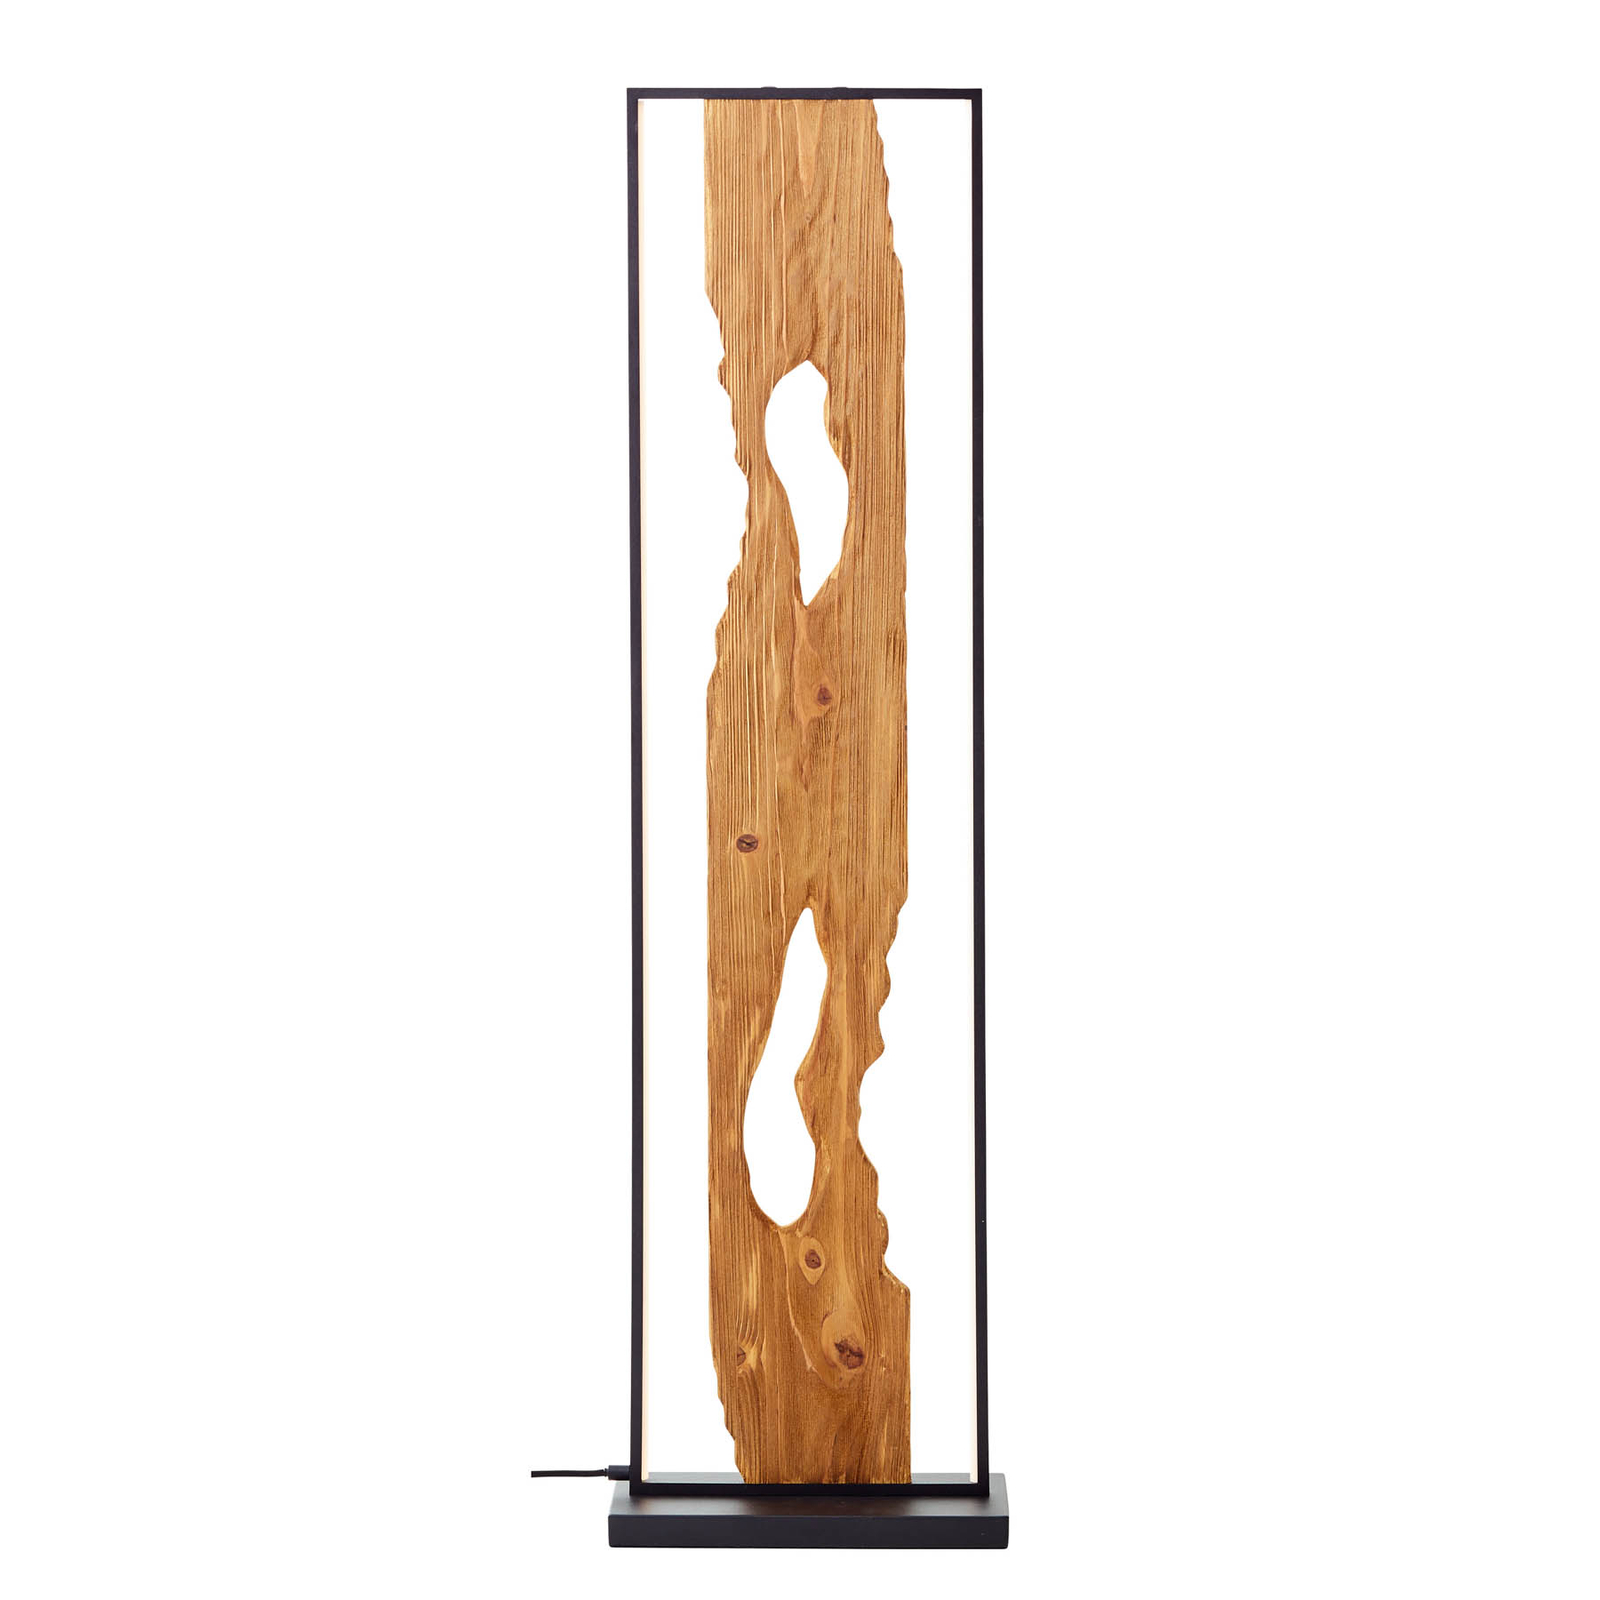 Chaumont LED floor lamp made of wood